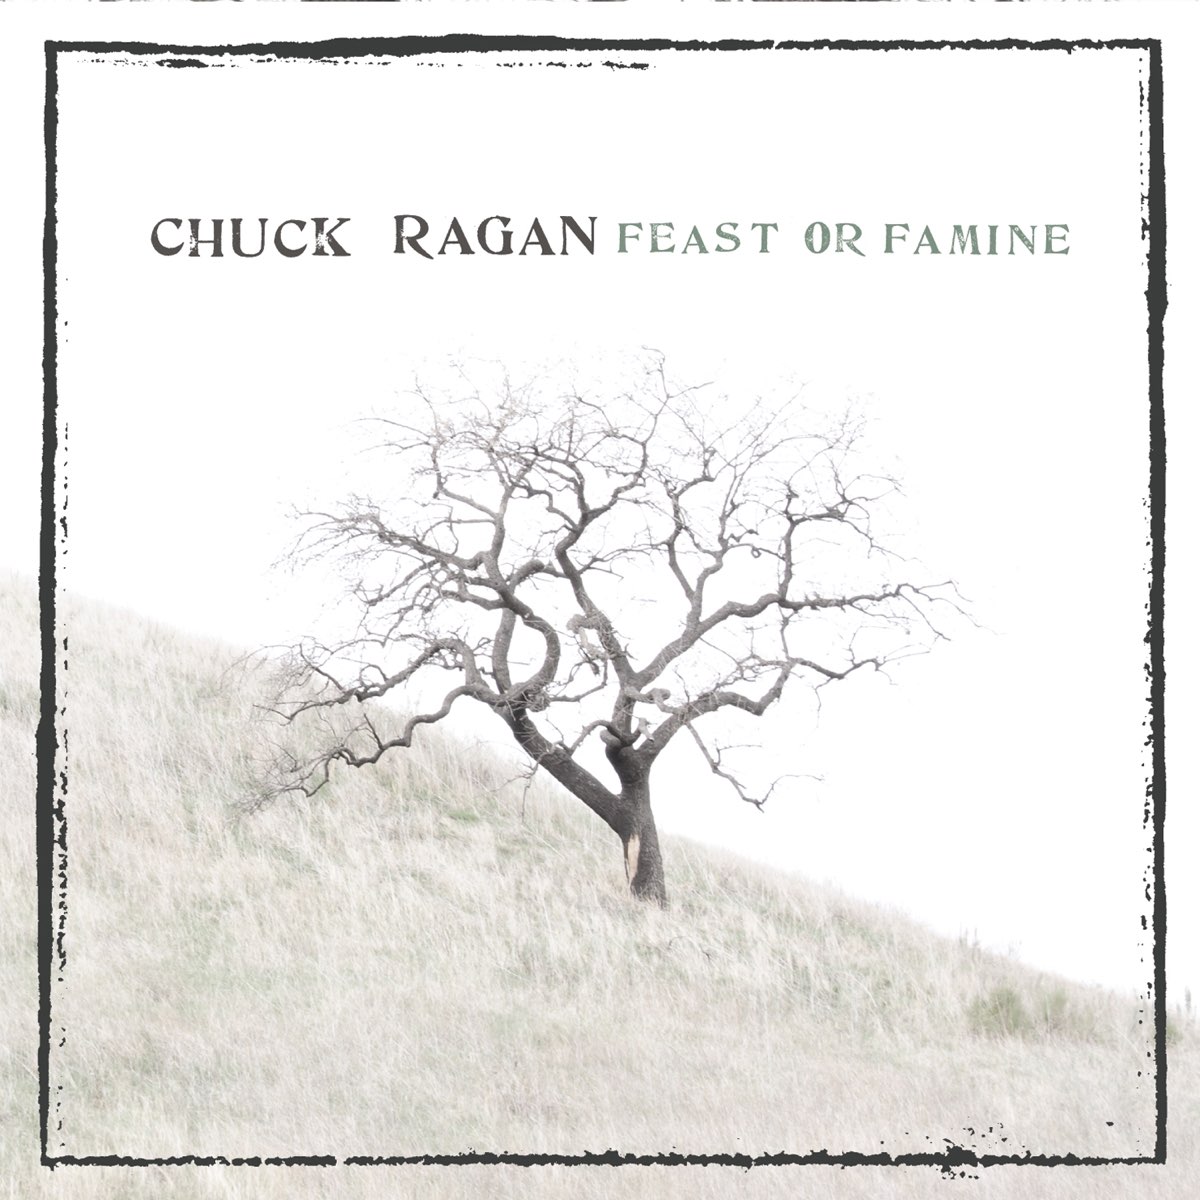 The Daily Orca-All My Records: Chuck Ragan “Feast or Famine”